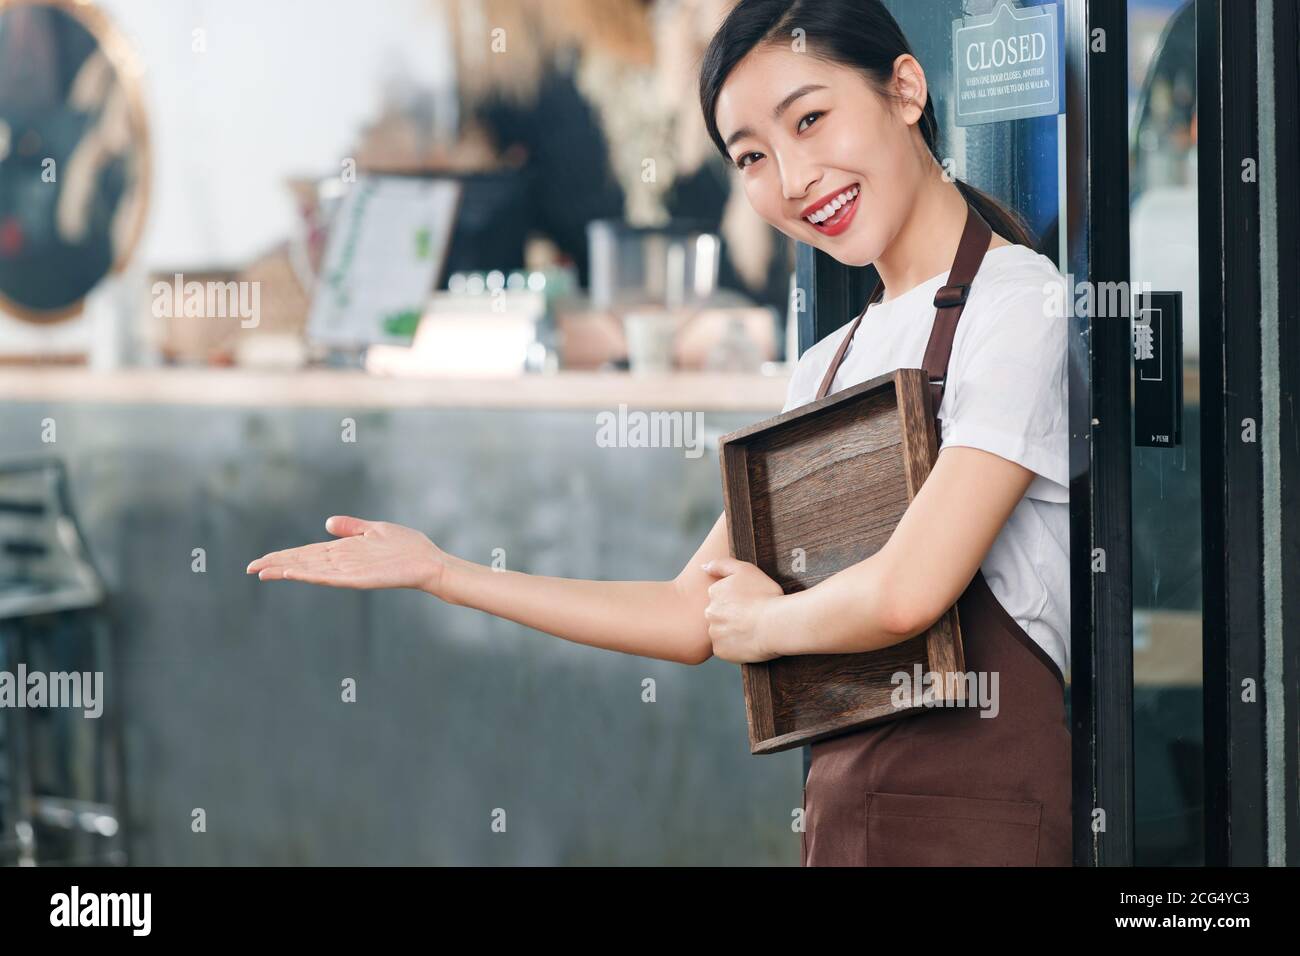 Holding a tray of coffee shop attendant Stock Photo